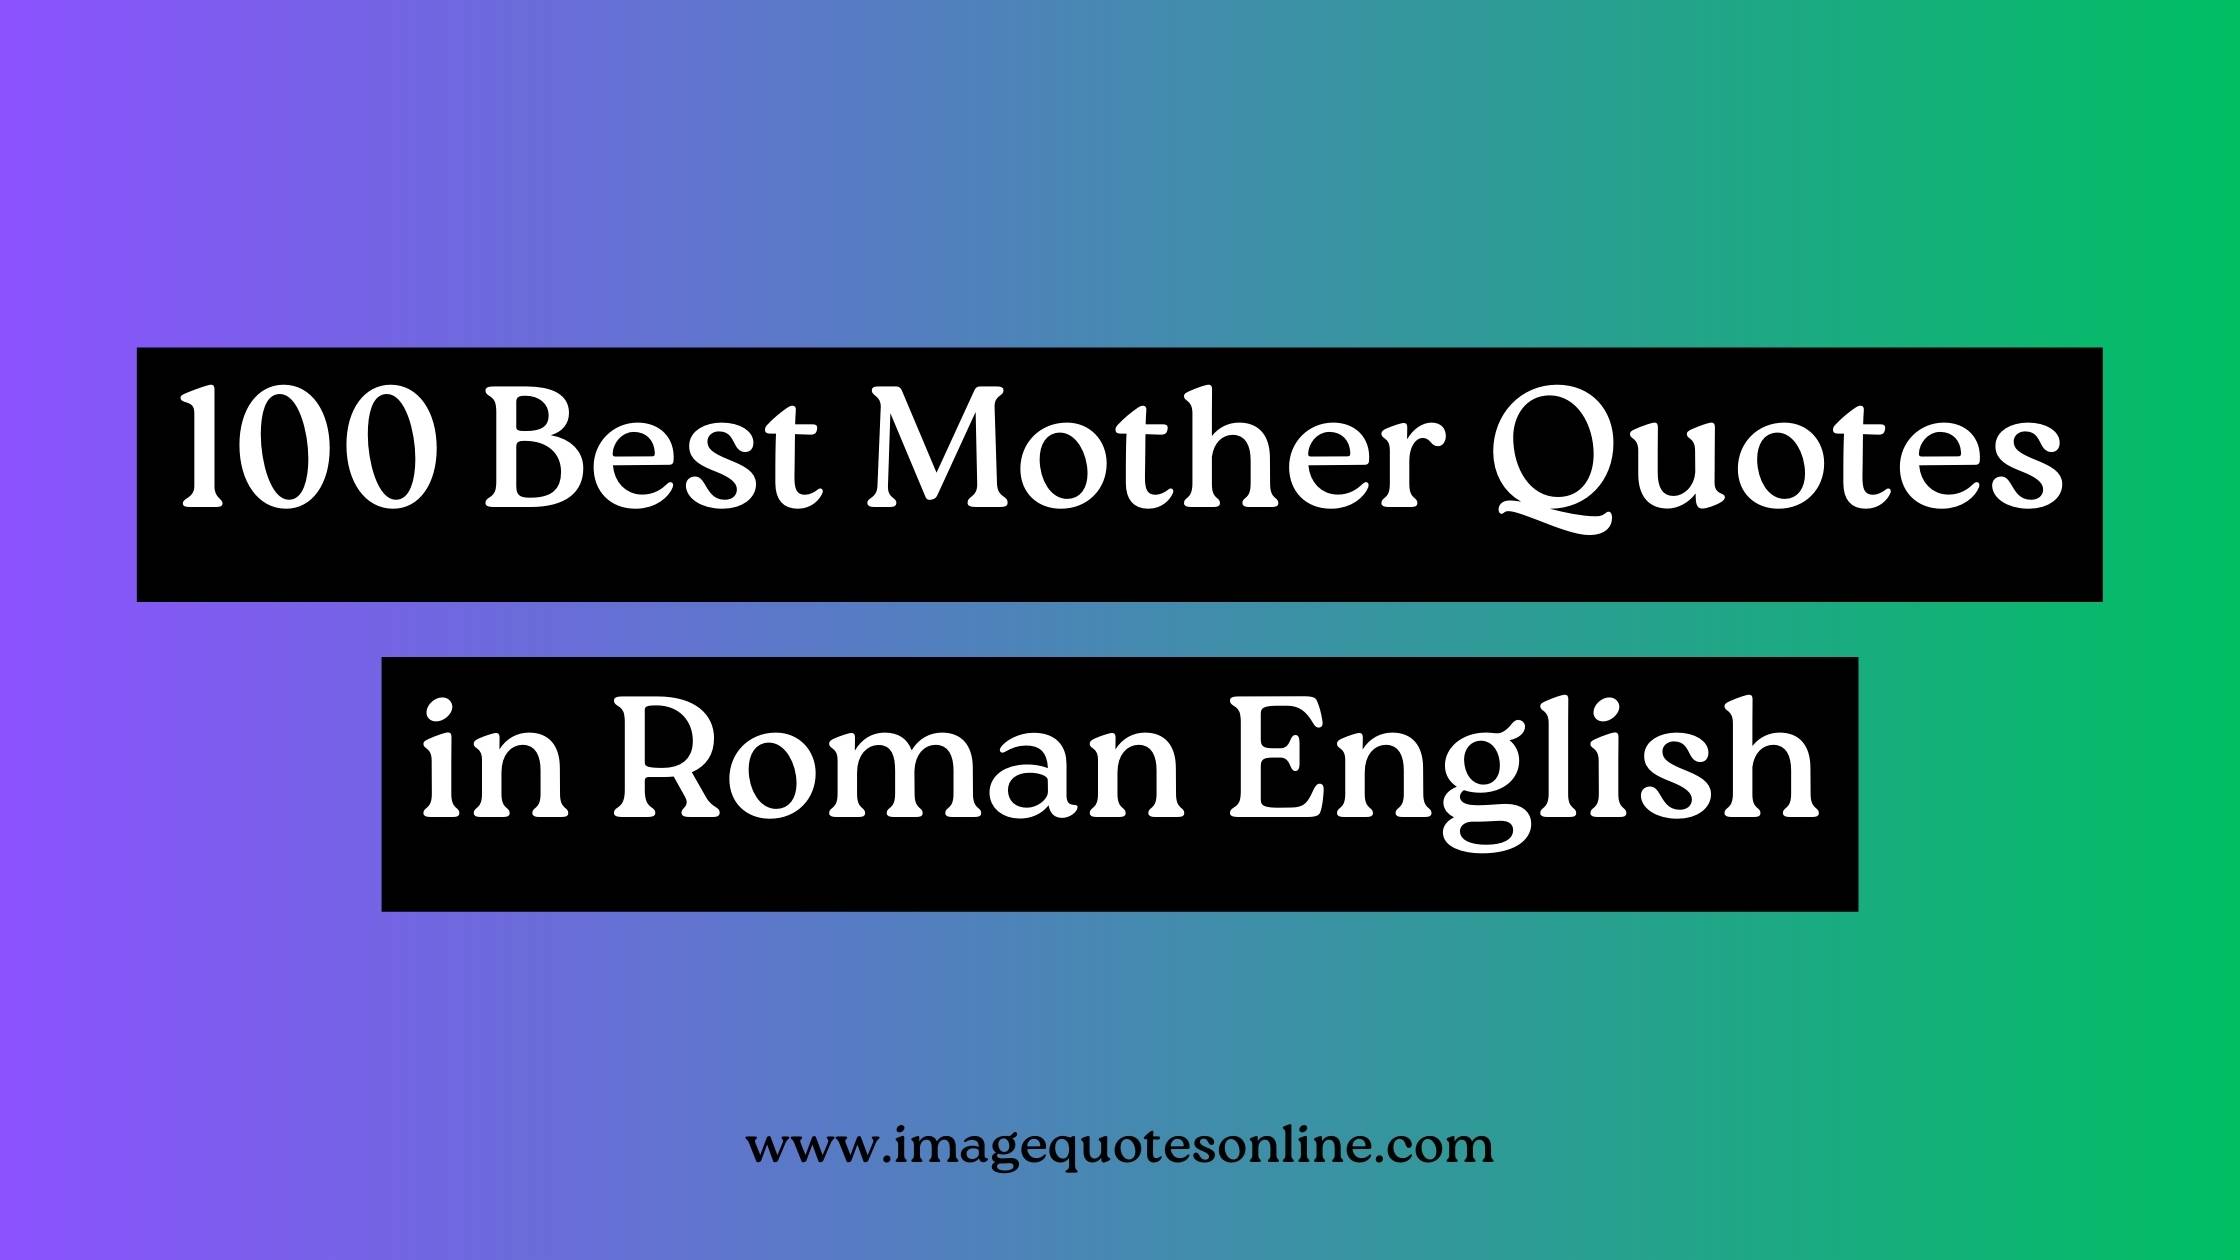 mother quotes in roman english